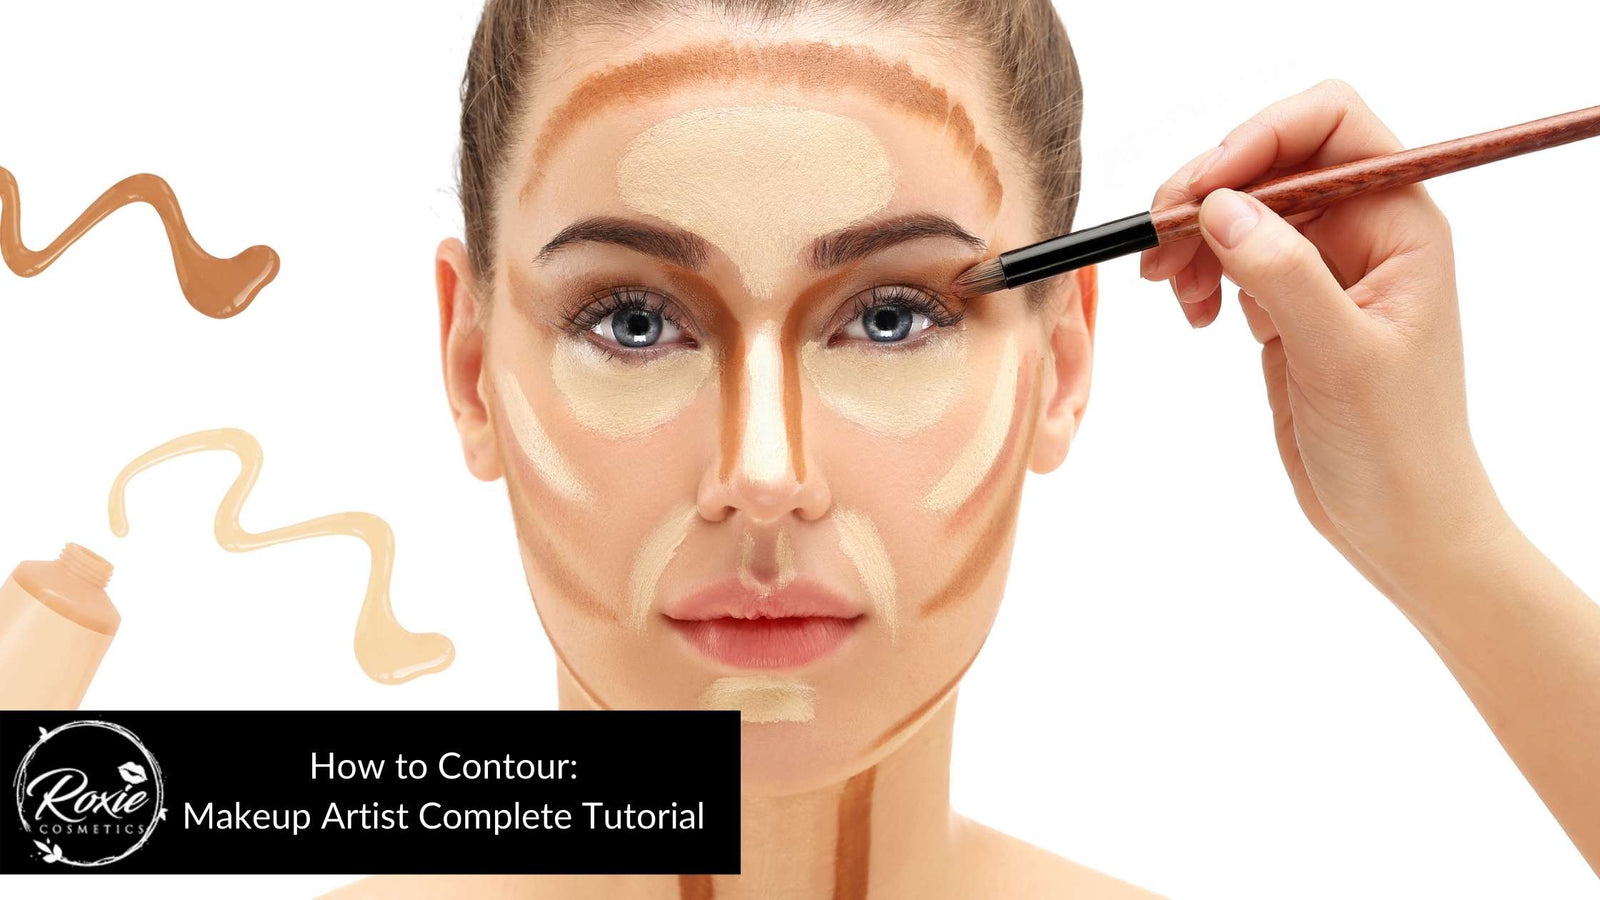 This beauty blogger contoured her whole body — to make an